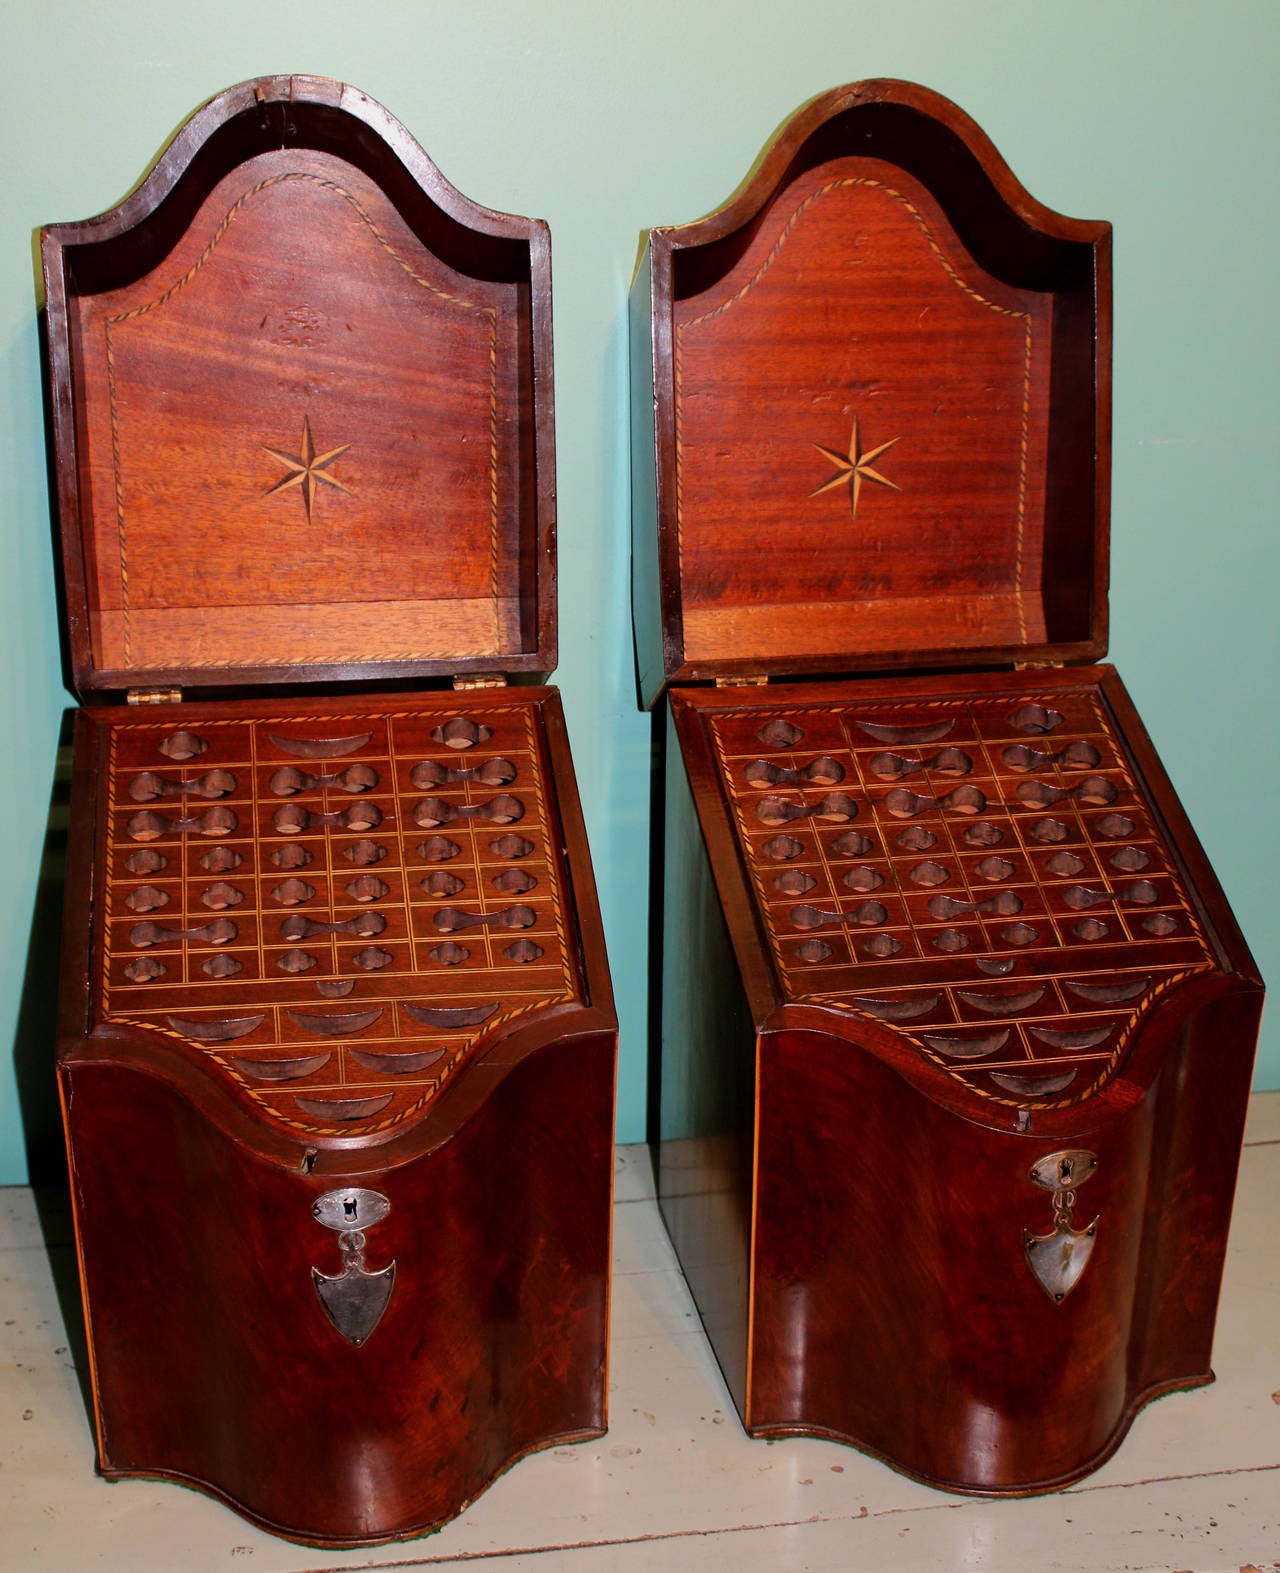 American Hepplewhite Knife Boxes in Mahogany with Silver Mounts 1